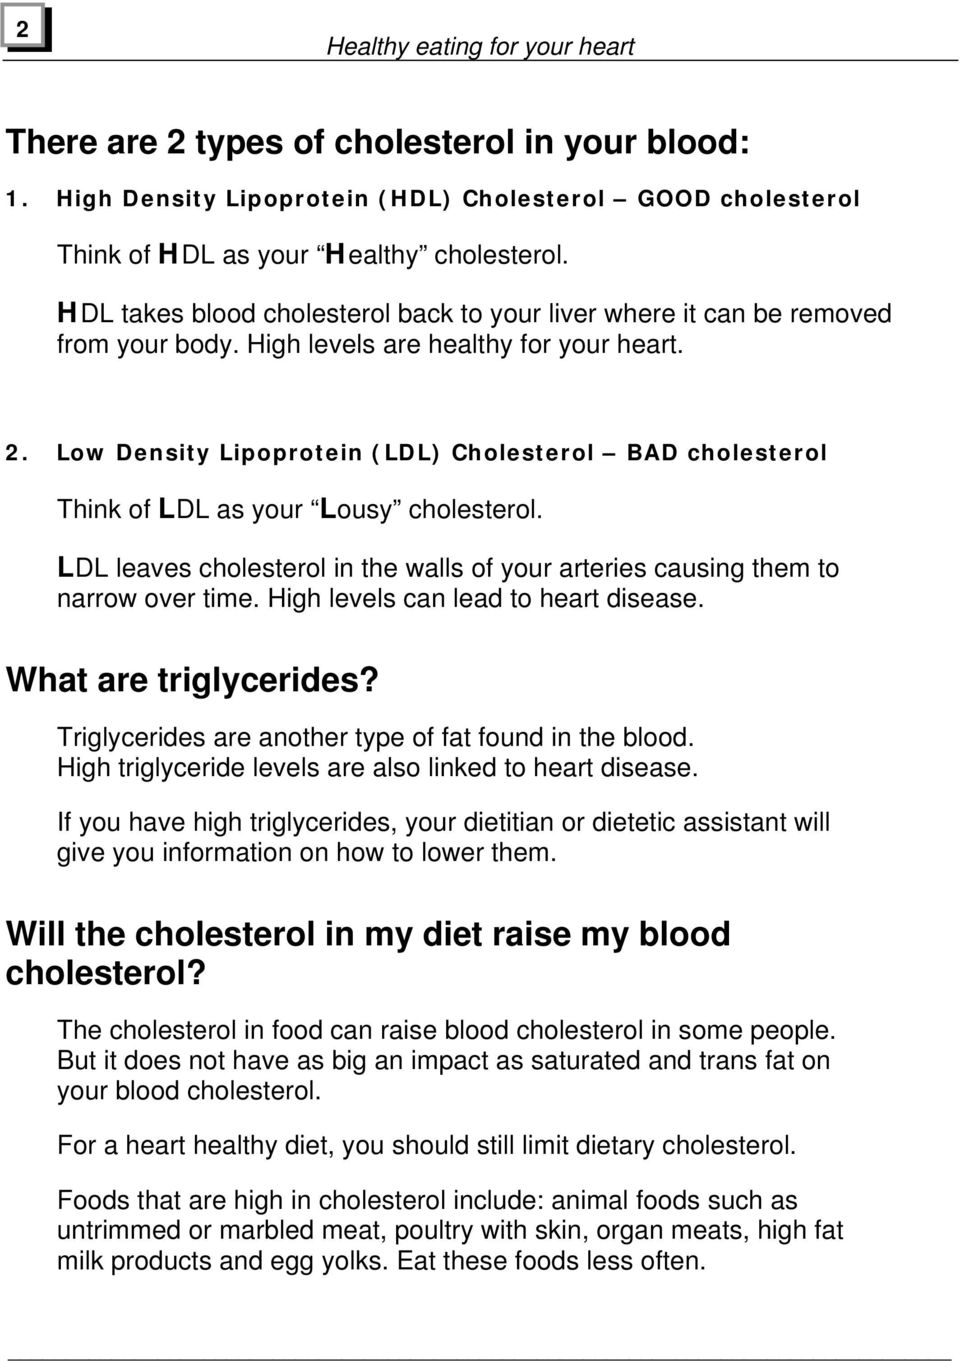 Low Density Lipoprotein (LDL) BAD cholesterol Think of LDL as your Lousy cholesterol. LDL leaves cholesterol in the walls of your arteries causing them to narrow over time.